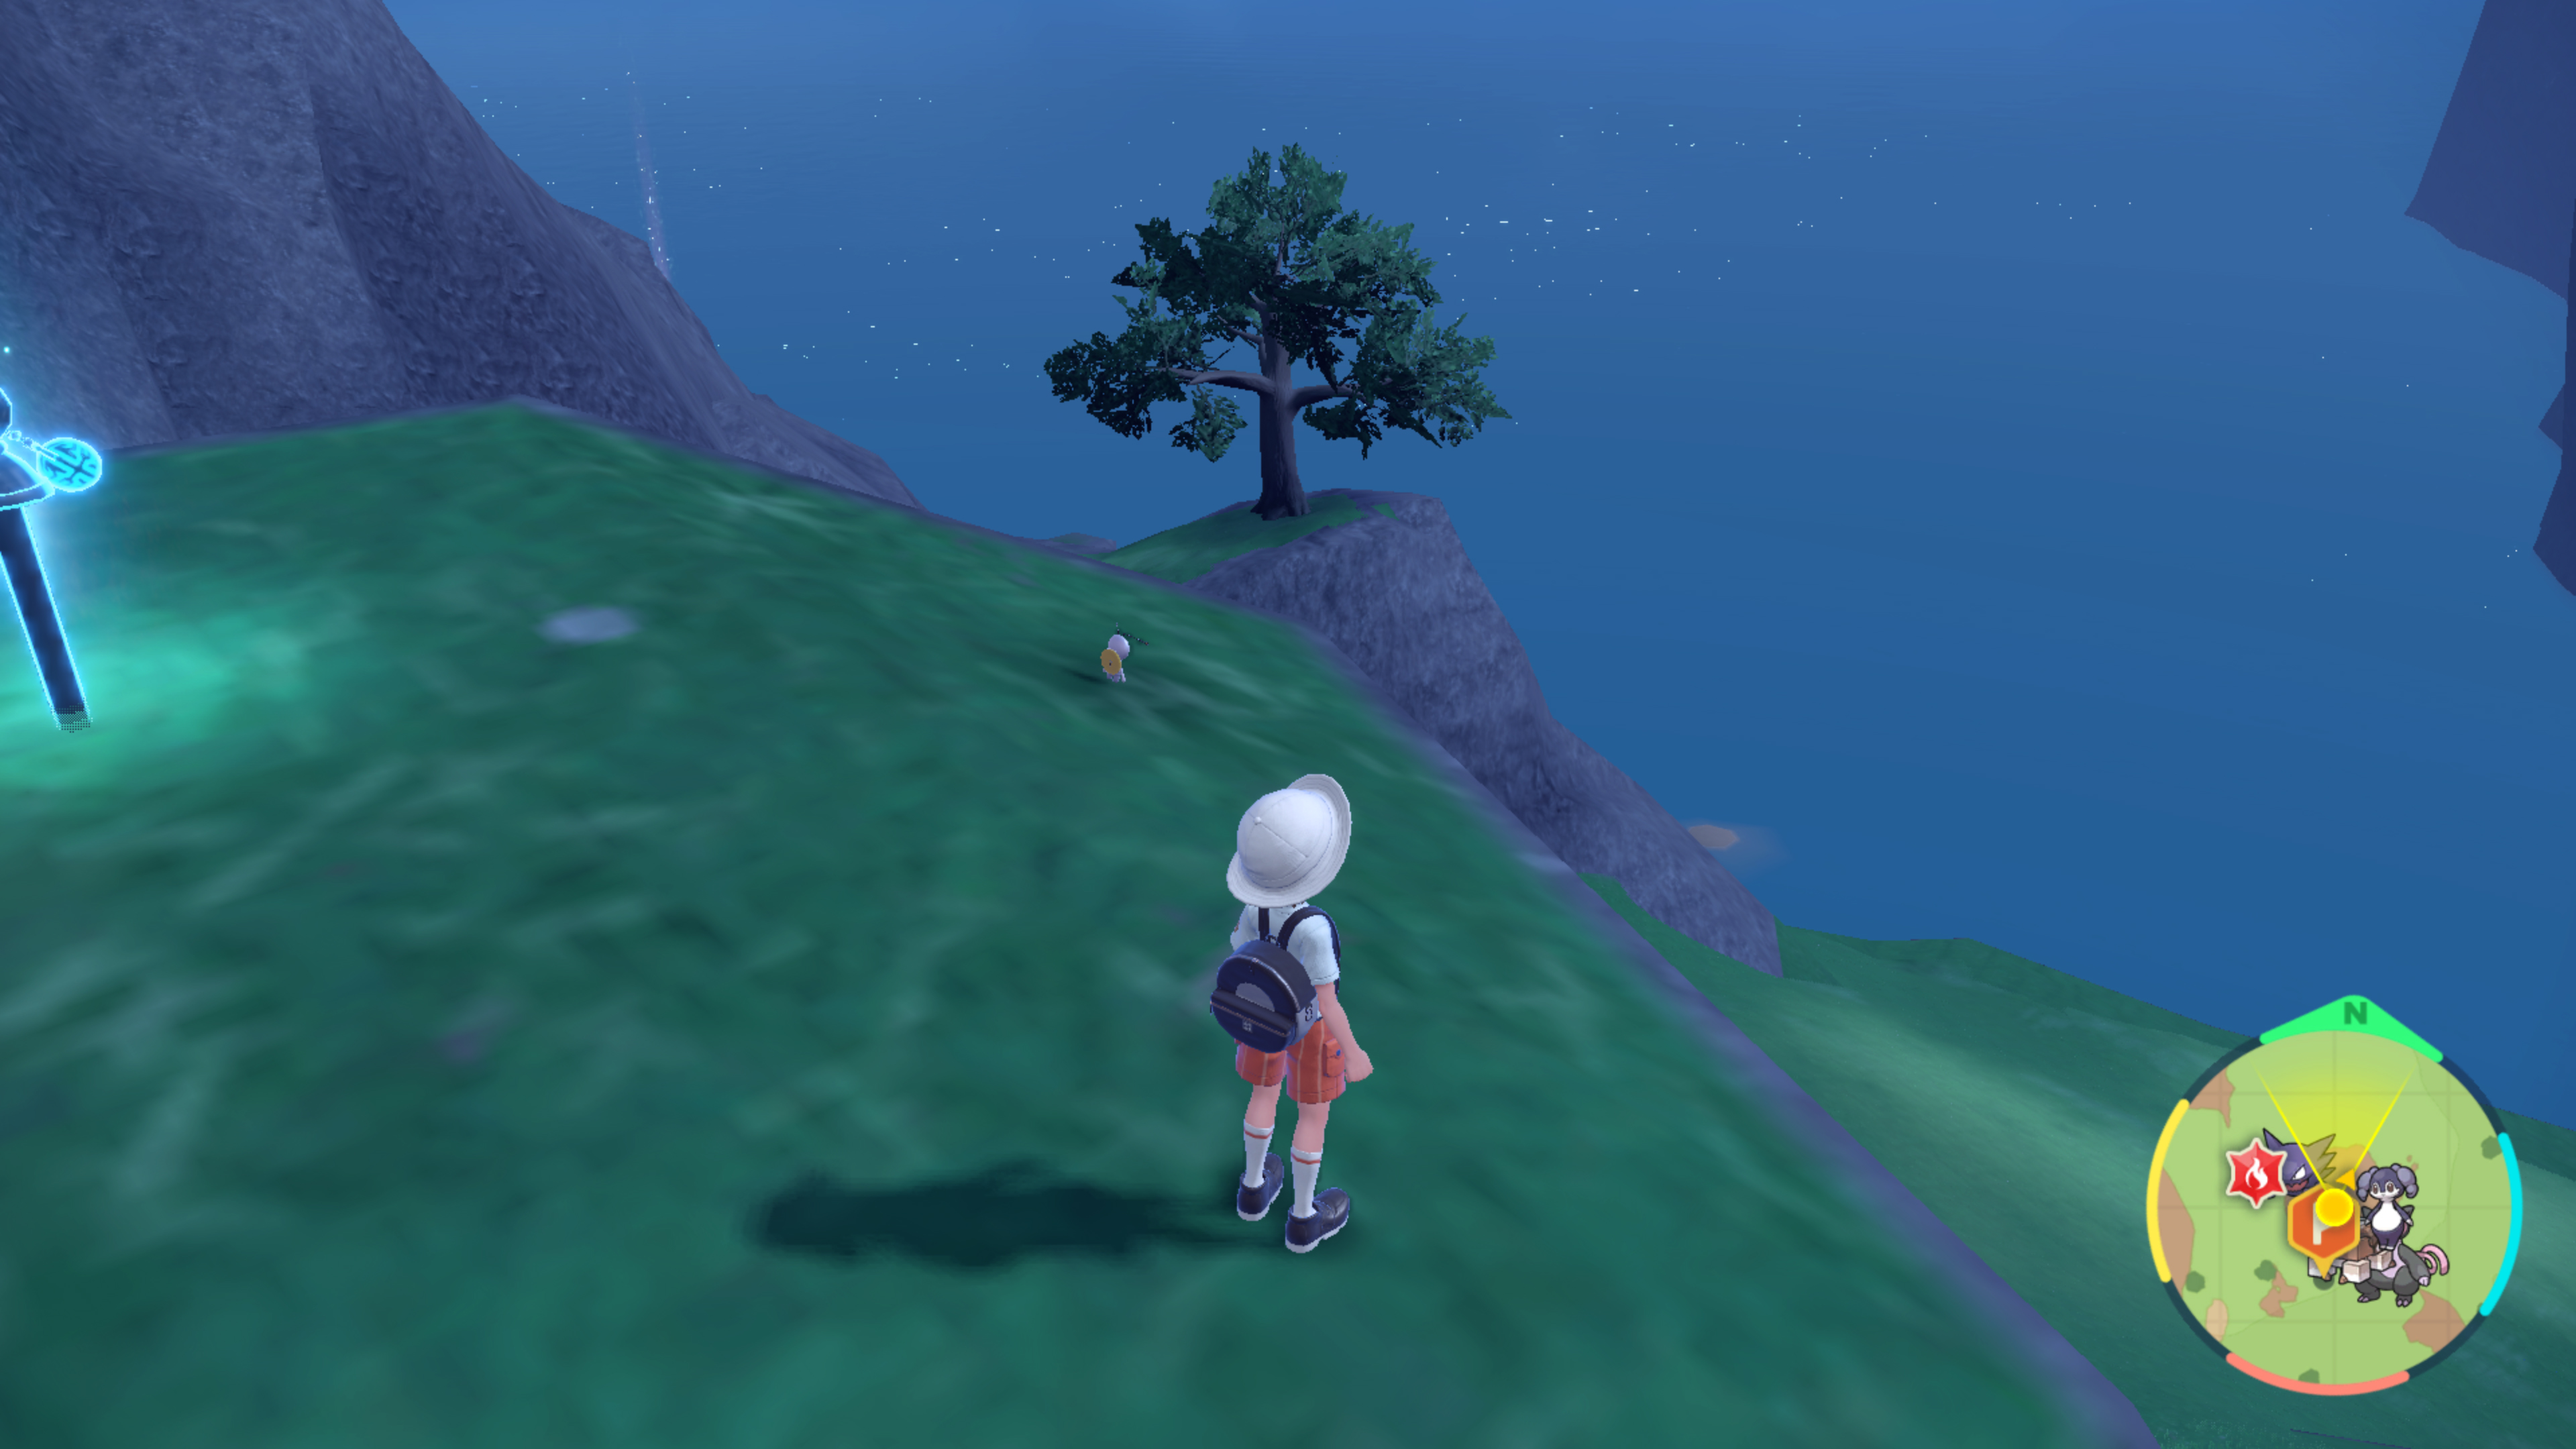 You can find Roaming Gimmighoul on the edge of cliffs